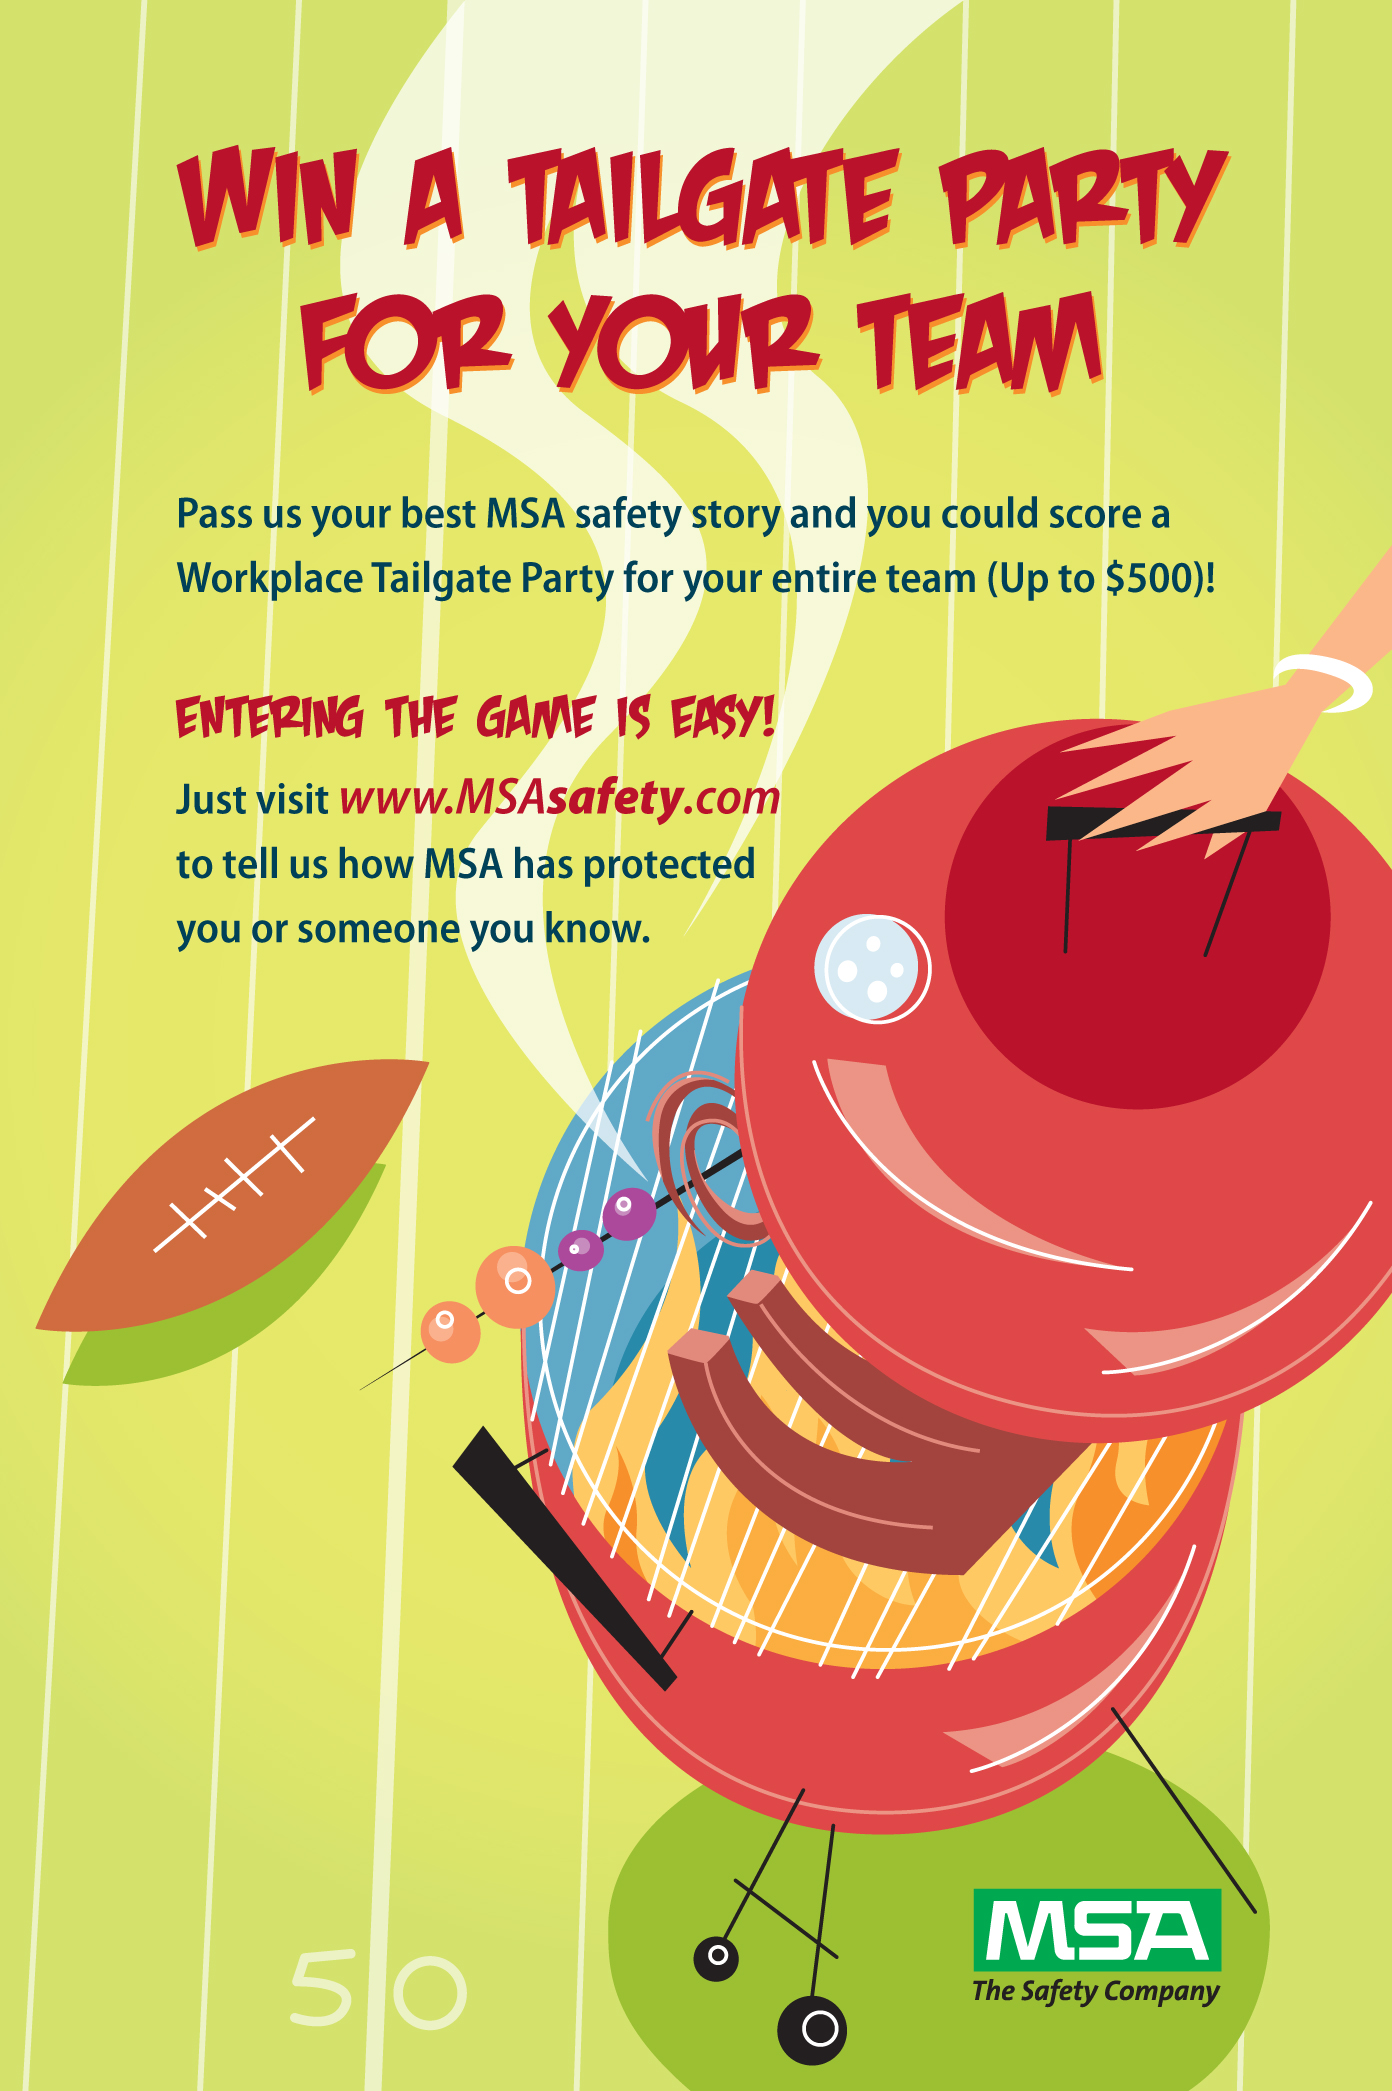 Win a TAILGATE PARTY for your team!